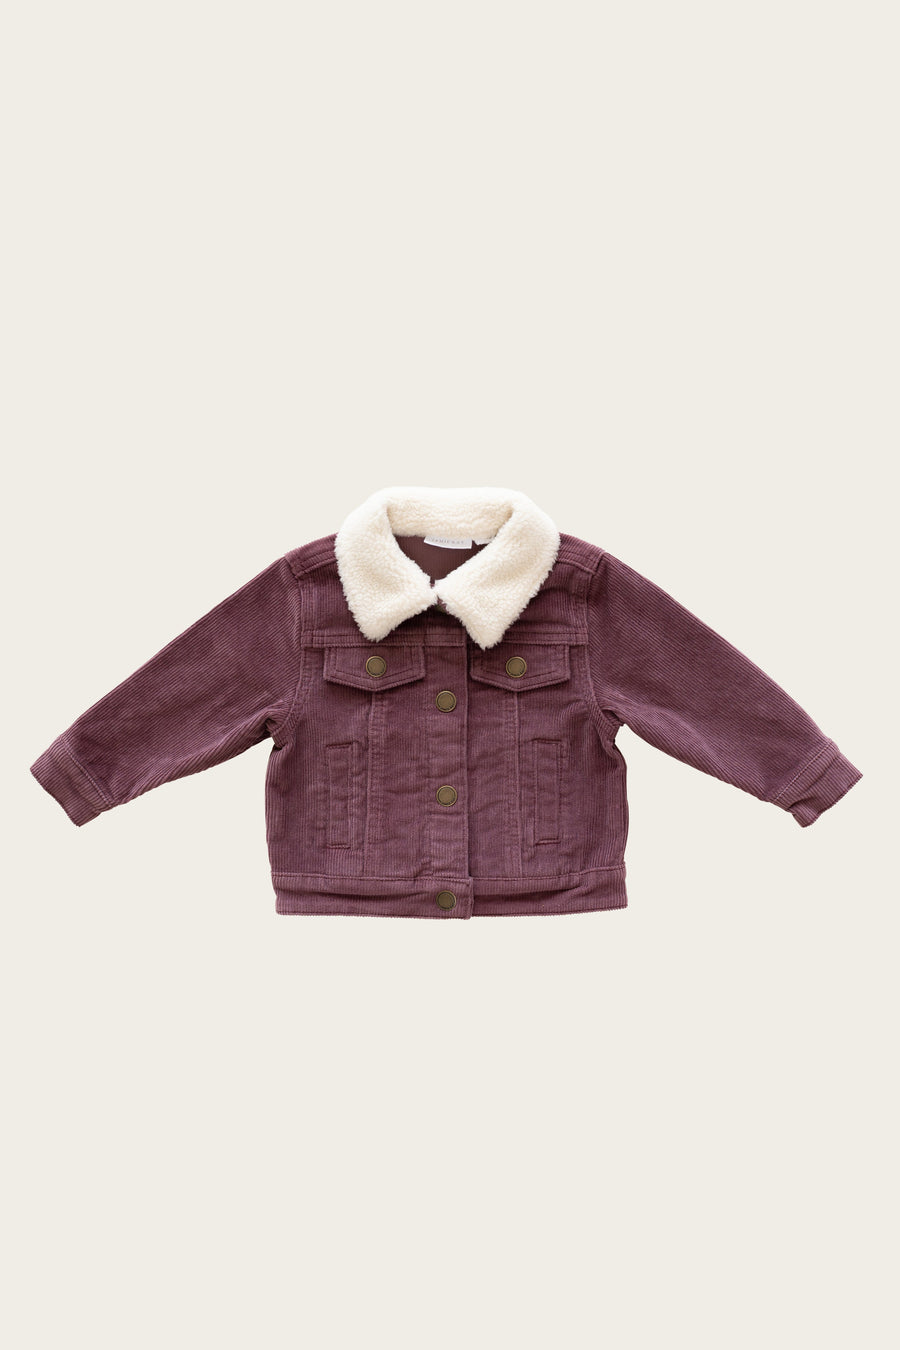 Cord Jacket - Rose Taupe Childrens Jacket from Jamie Kay USA